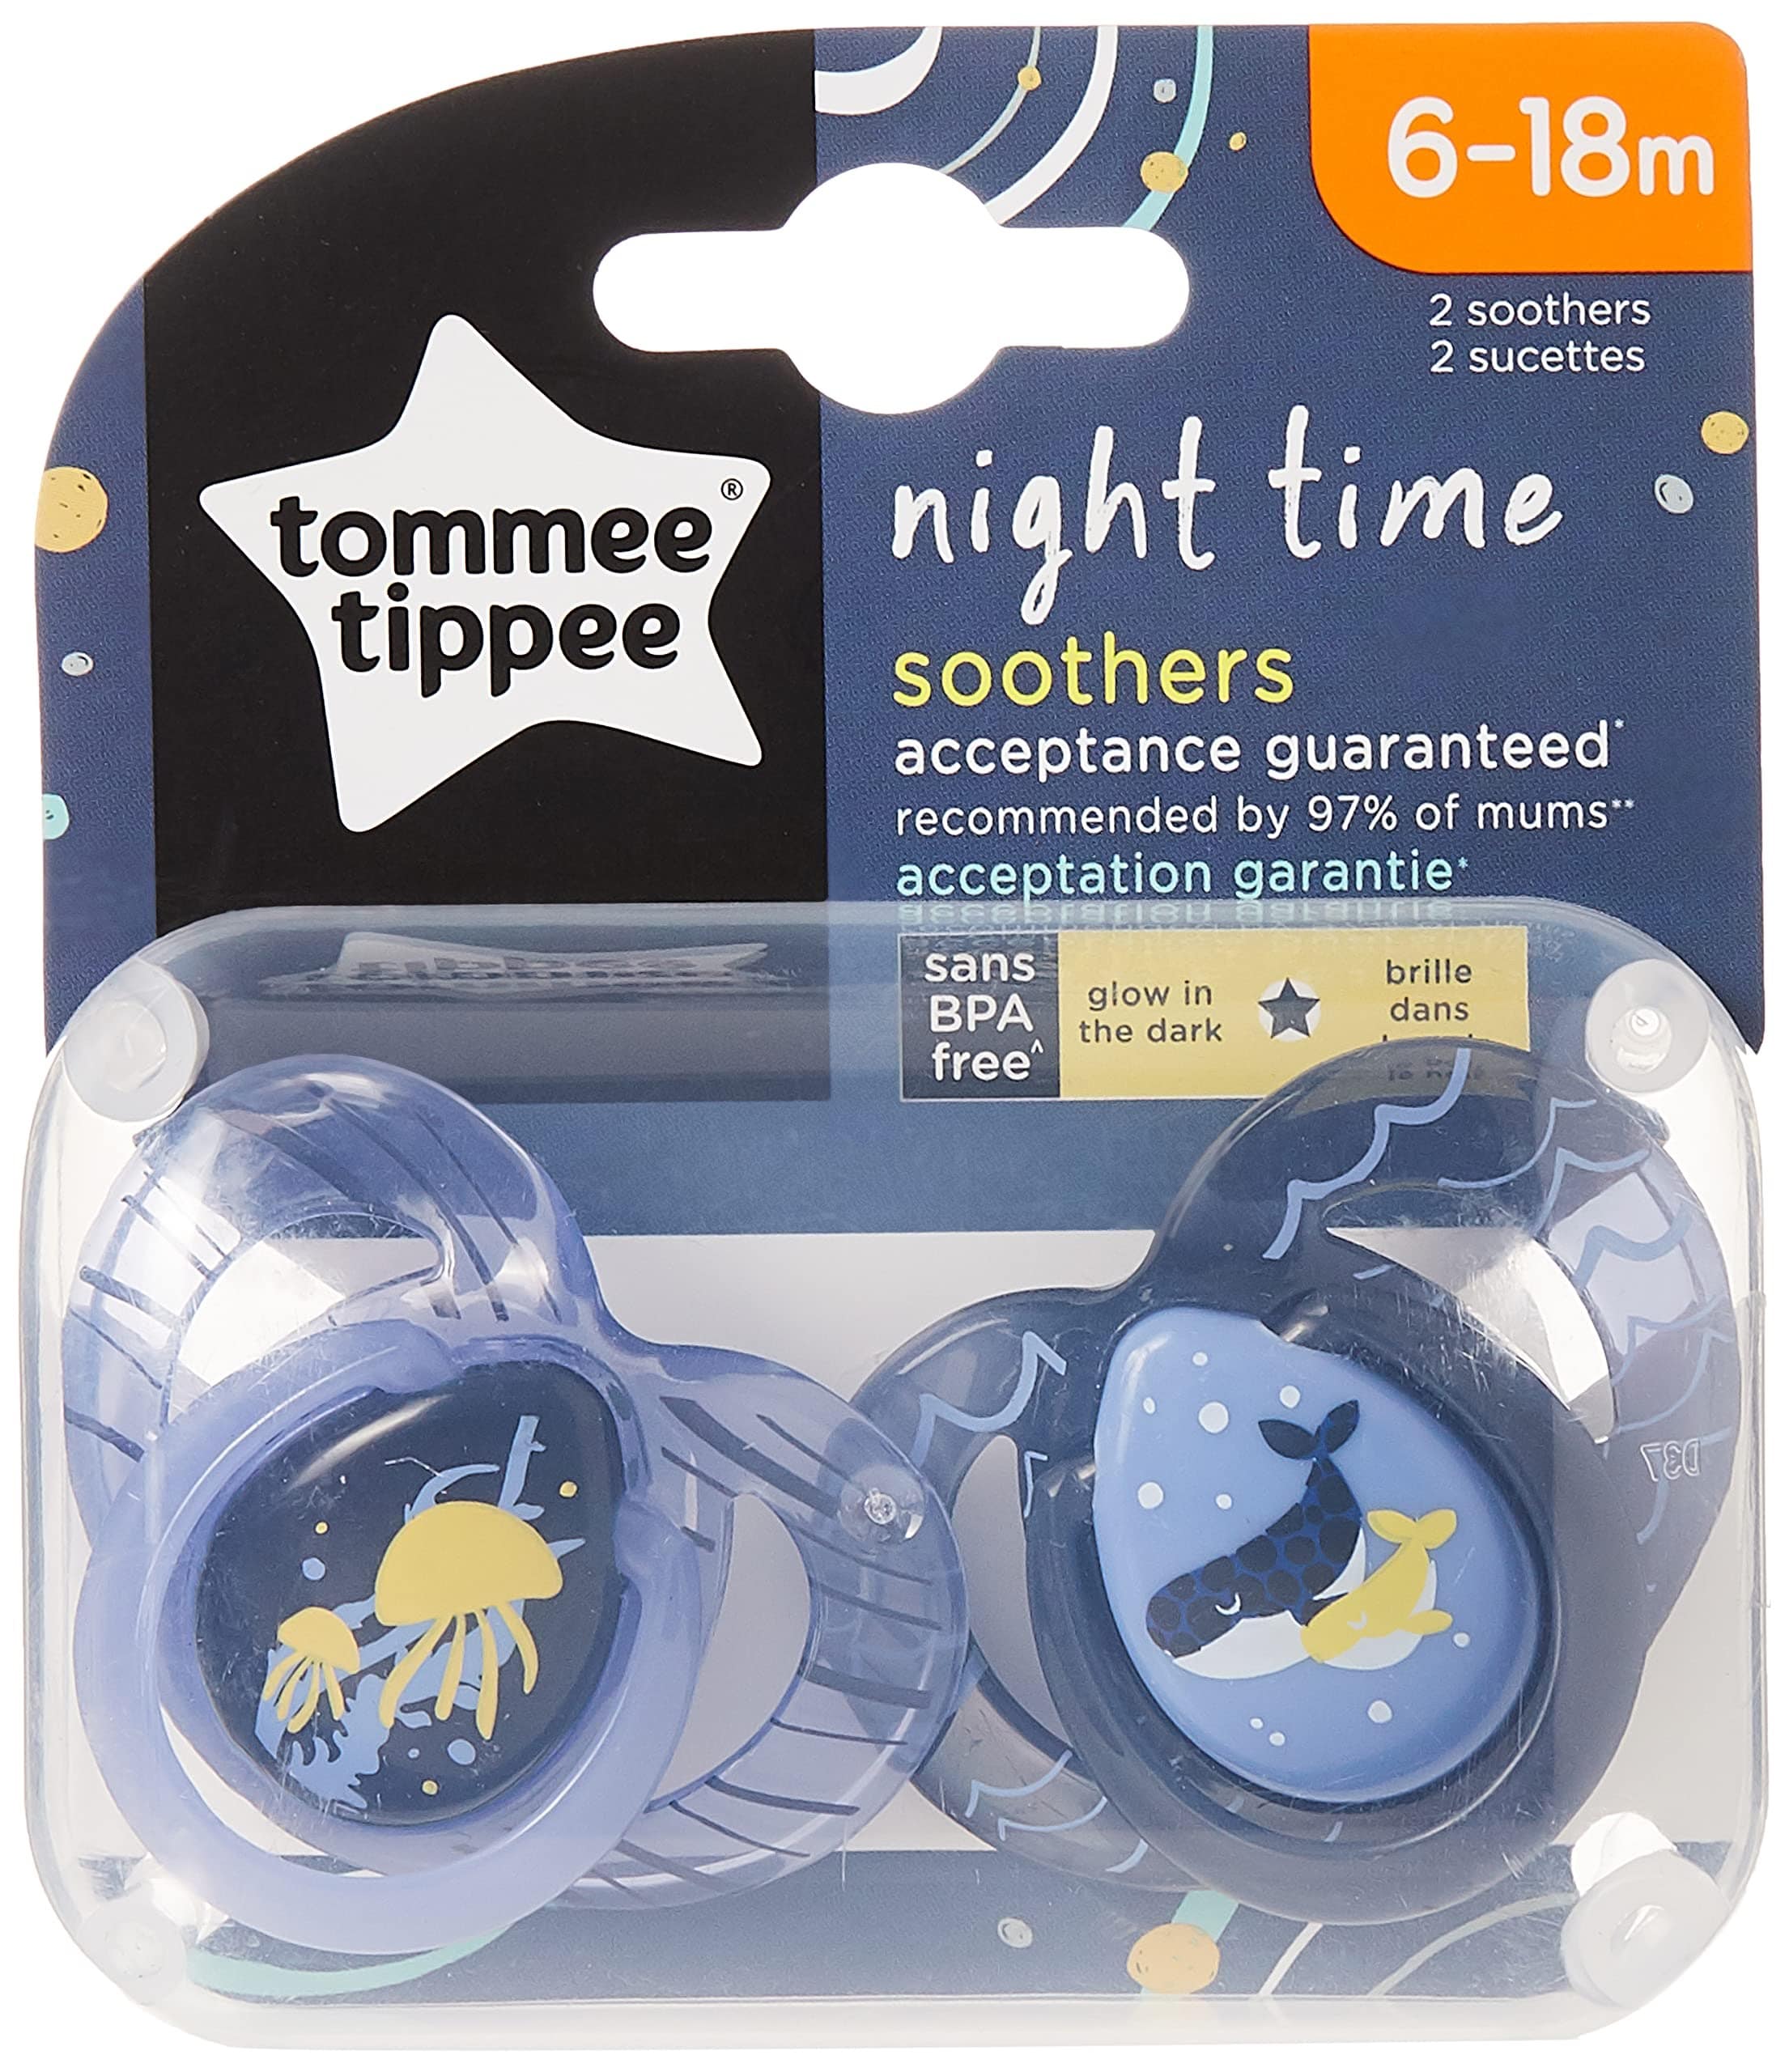 2 sucettes Anytime, Tommee Tippee de Tommee Tippee